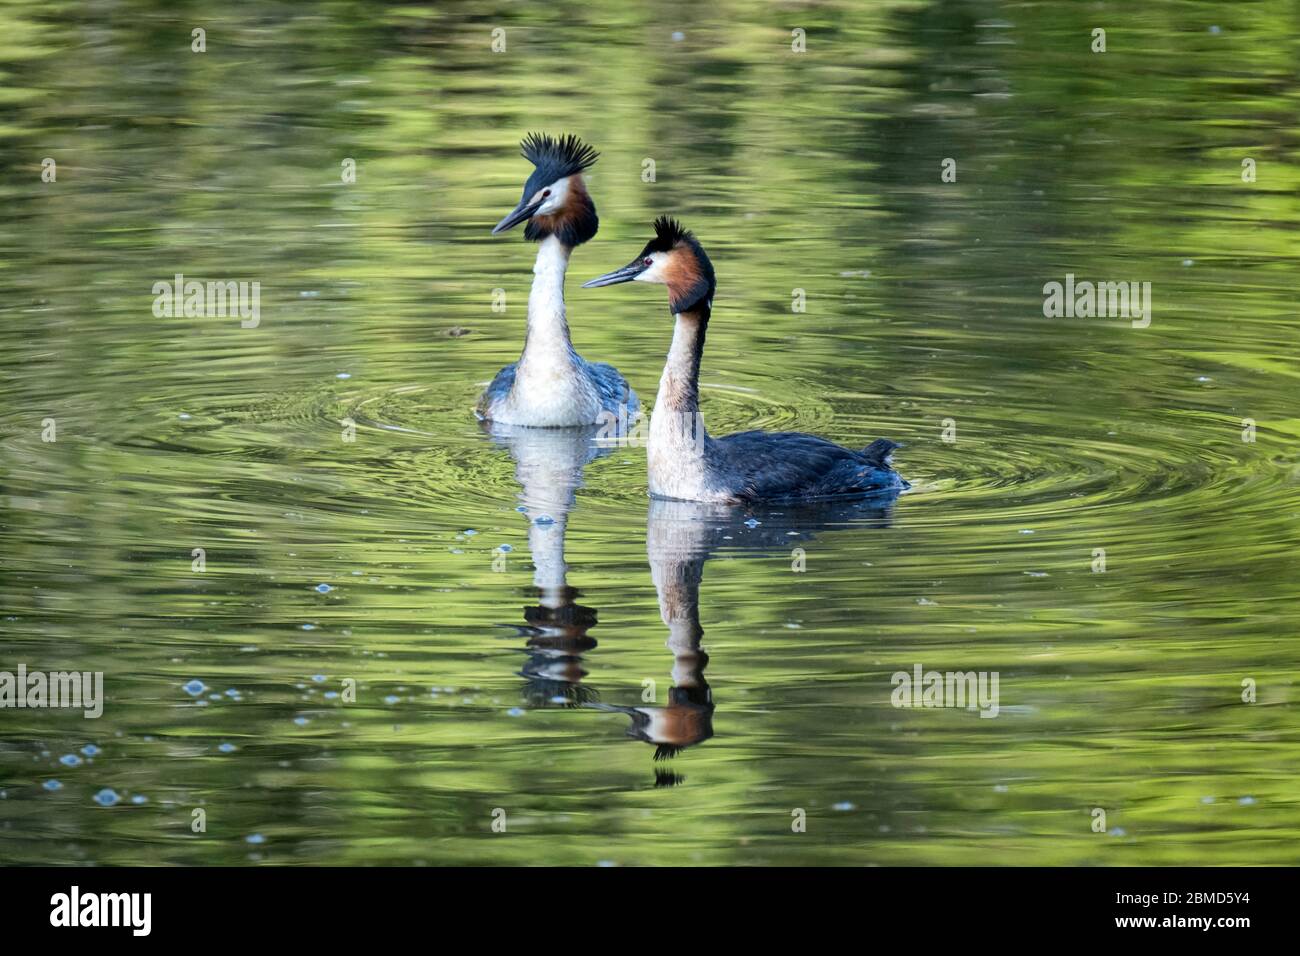 Great Crested Grebes (Podiceps cristatus) in summer plumage, River Weaver, Cheshire, England, UK Stock Photo